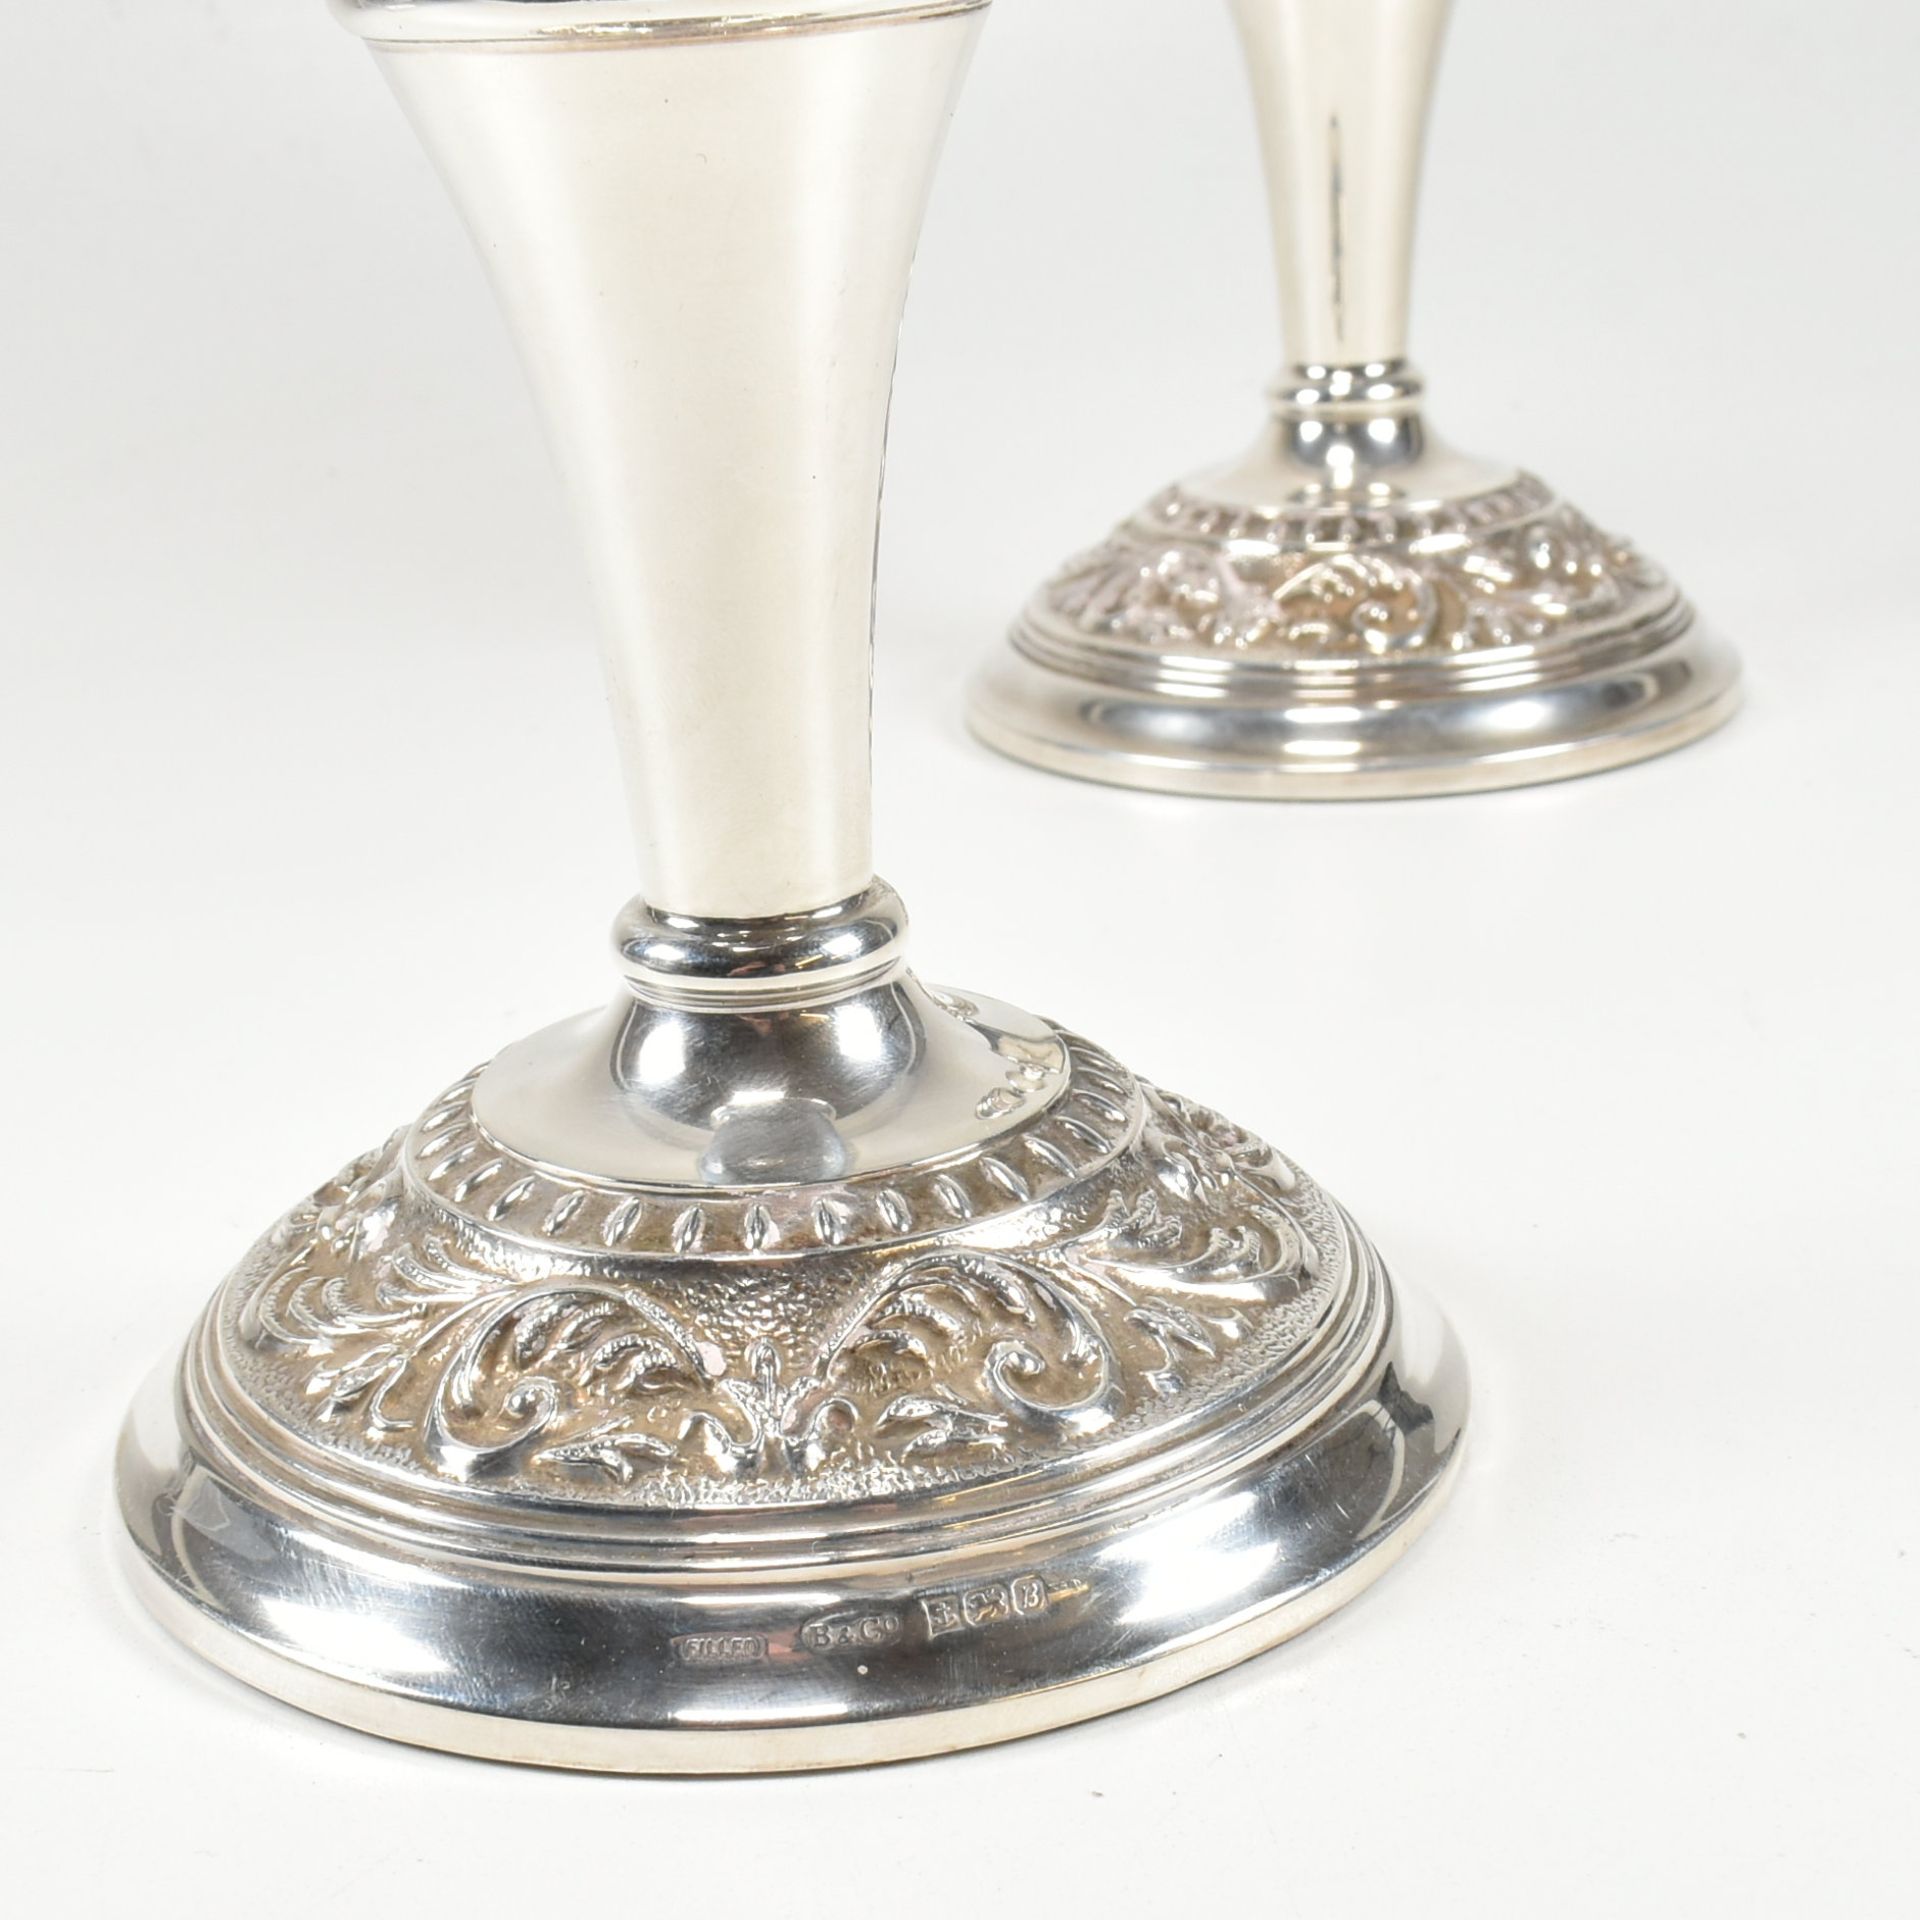 PAIR OF 1970S HALLMARKED SILVER MOUNTED CANDLESTICKS - Image 3 of 7